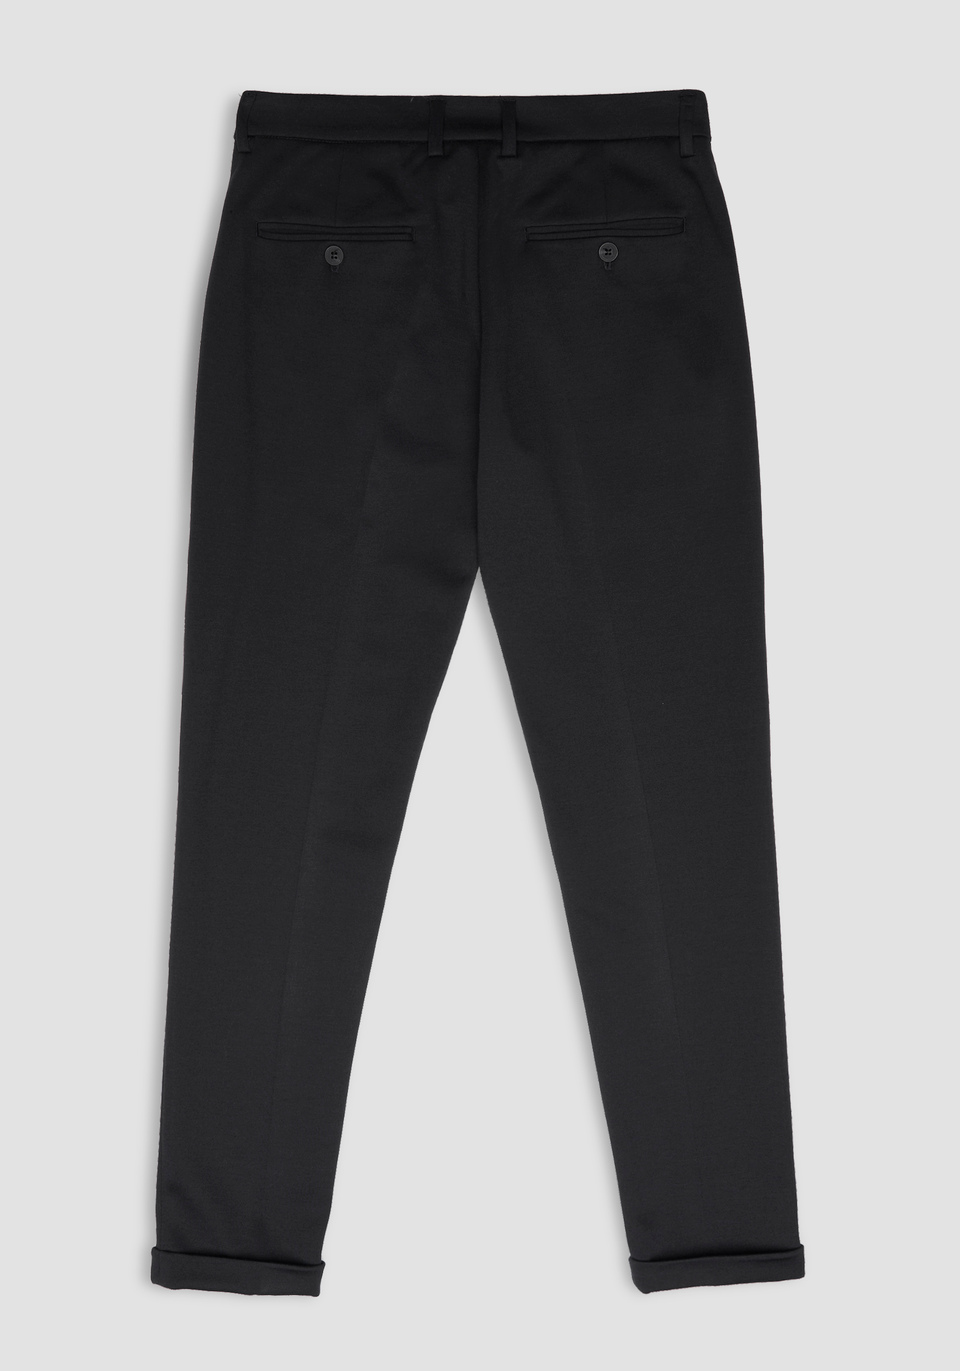 "ASHE" SUPER SKINNY FIT TROUSERS IN SOFT-TOUCH STRETCH FABRIC - Antony Morato Online Shop